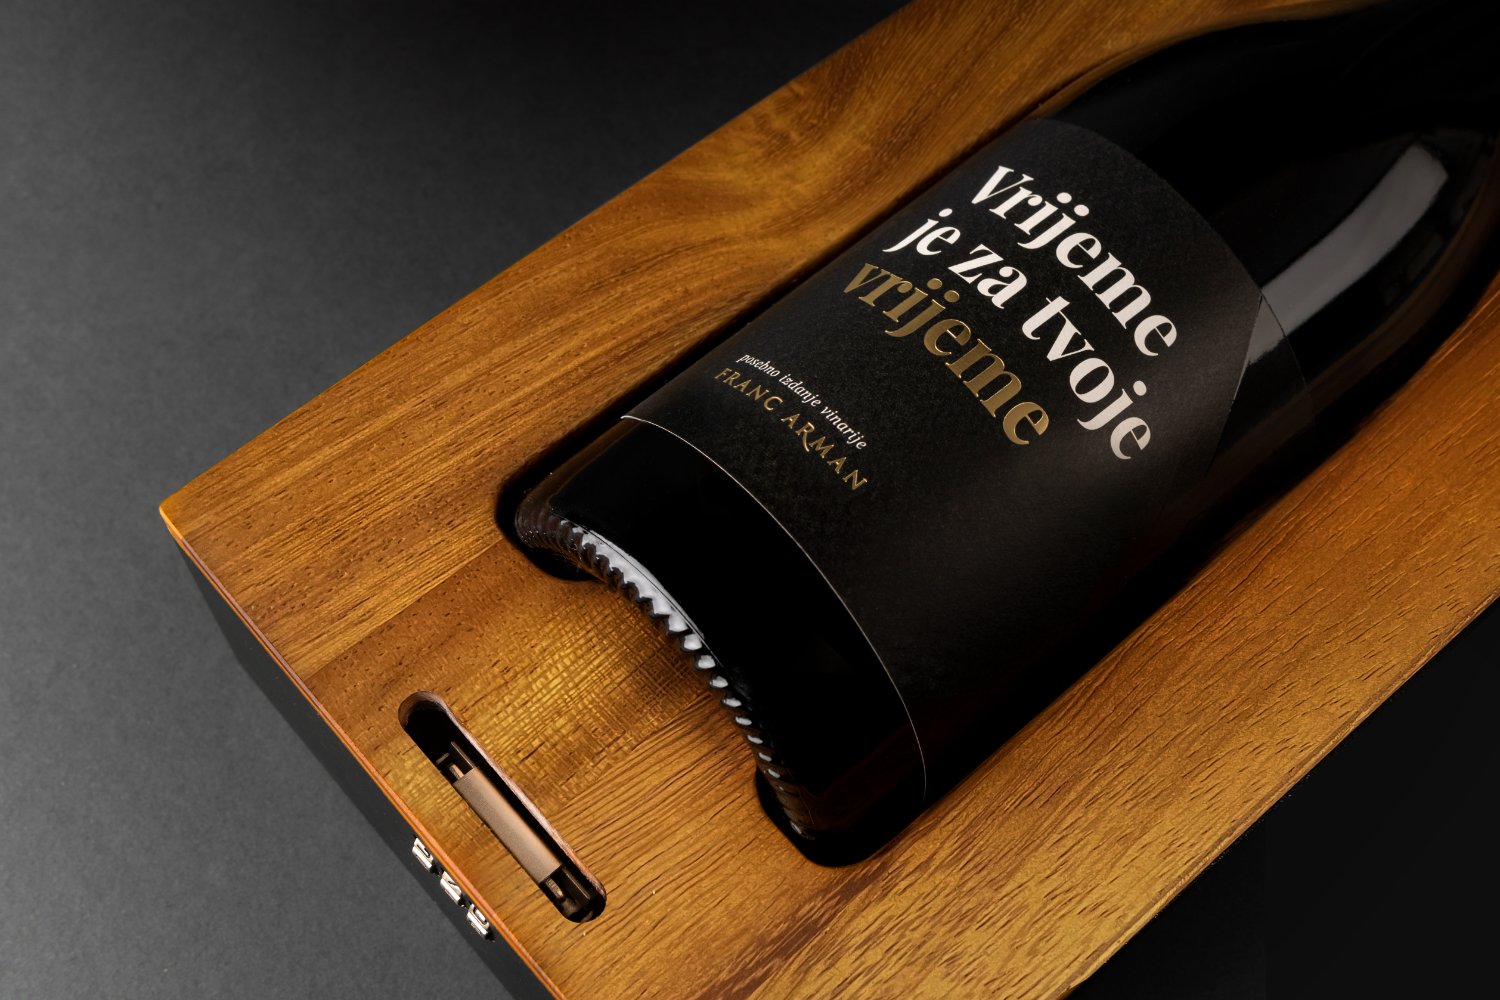 This Time Capsule Bottle of Wine Will Help You Age a Vintage Like a Professional